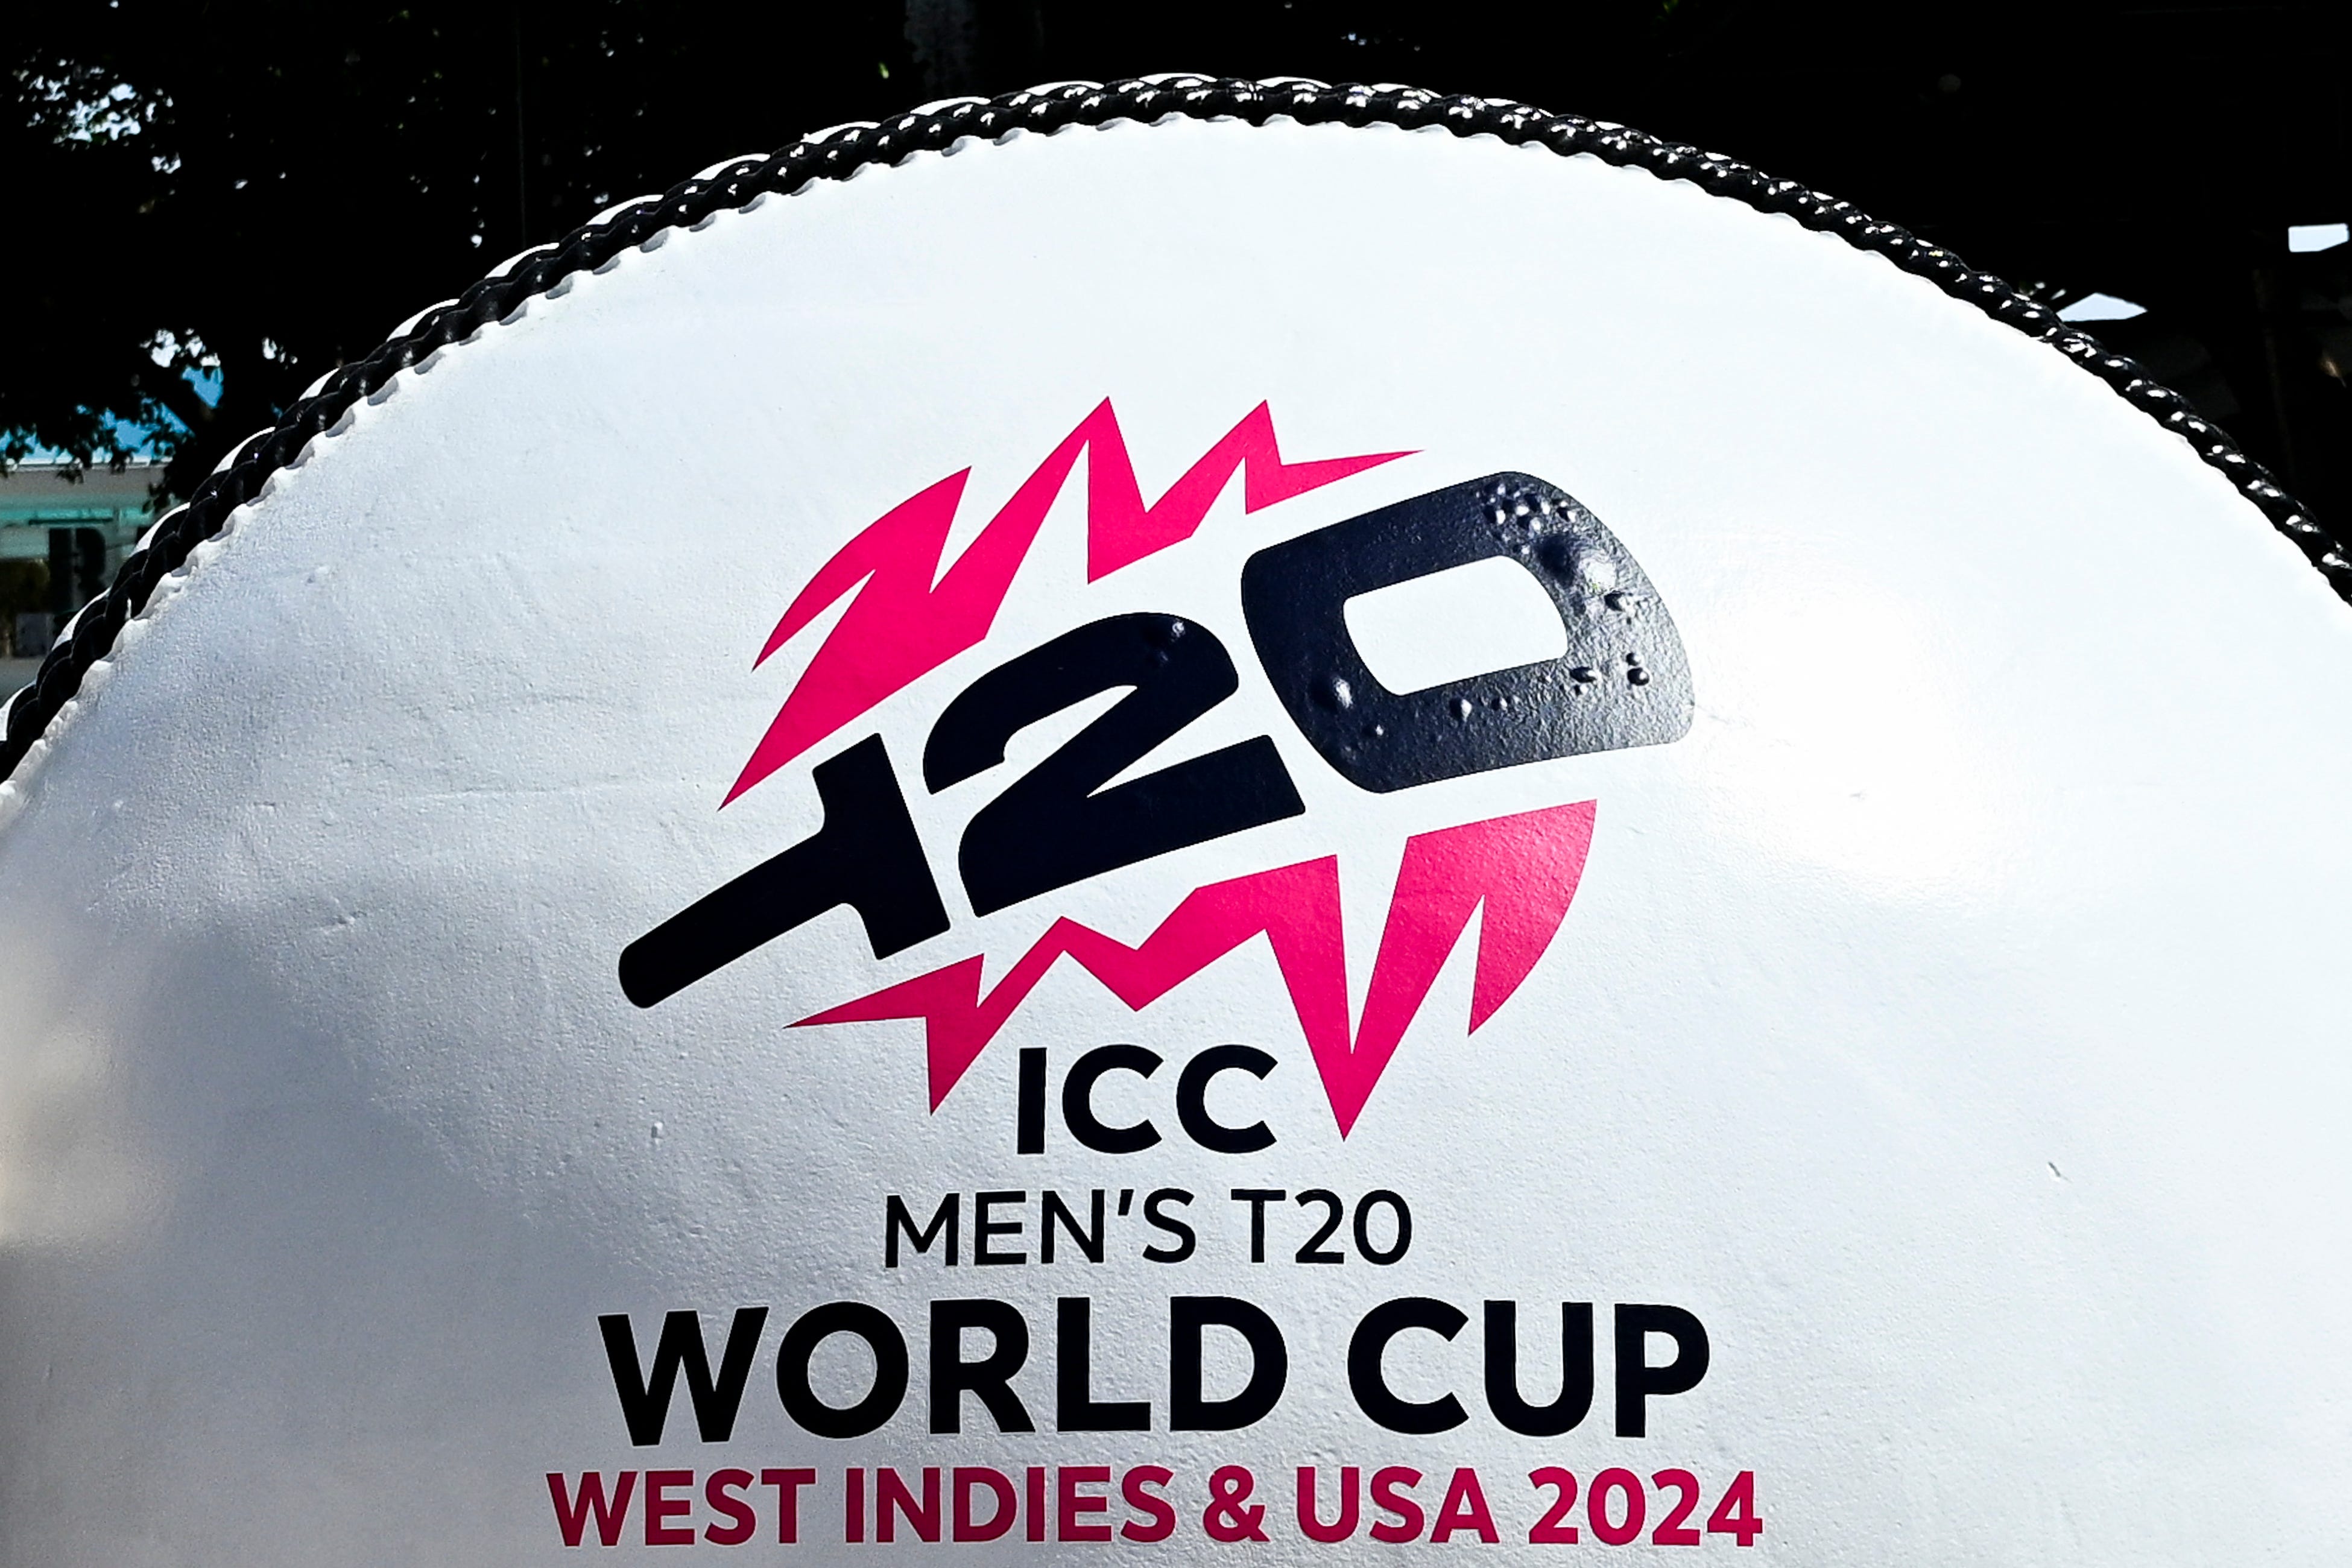 usa announces 15-member squad for 2024 t20 world cup led by monank patel: see the full list